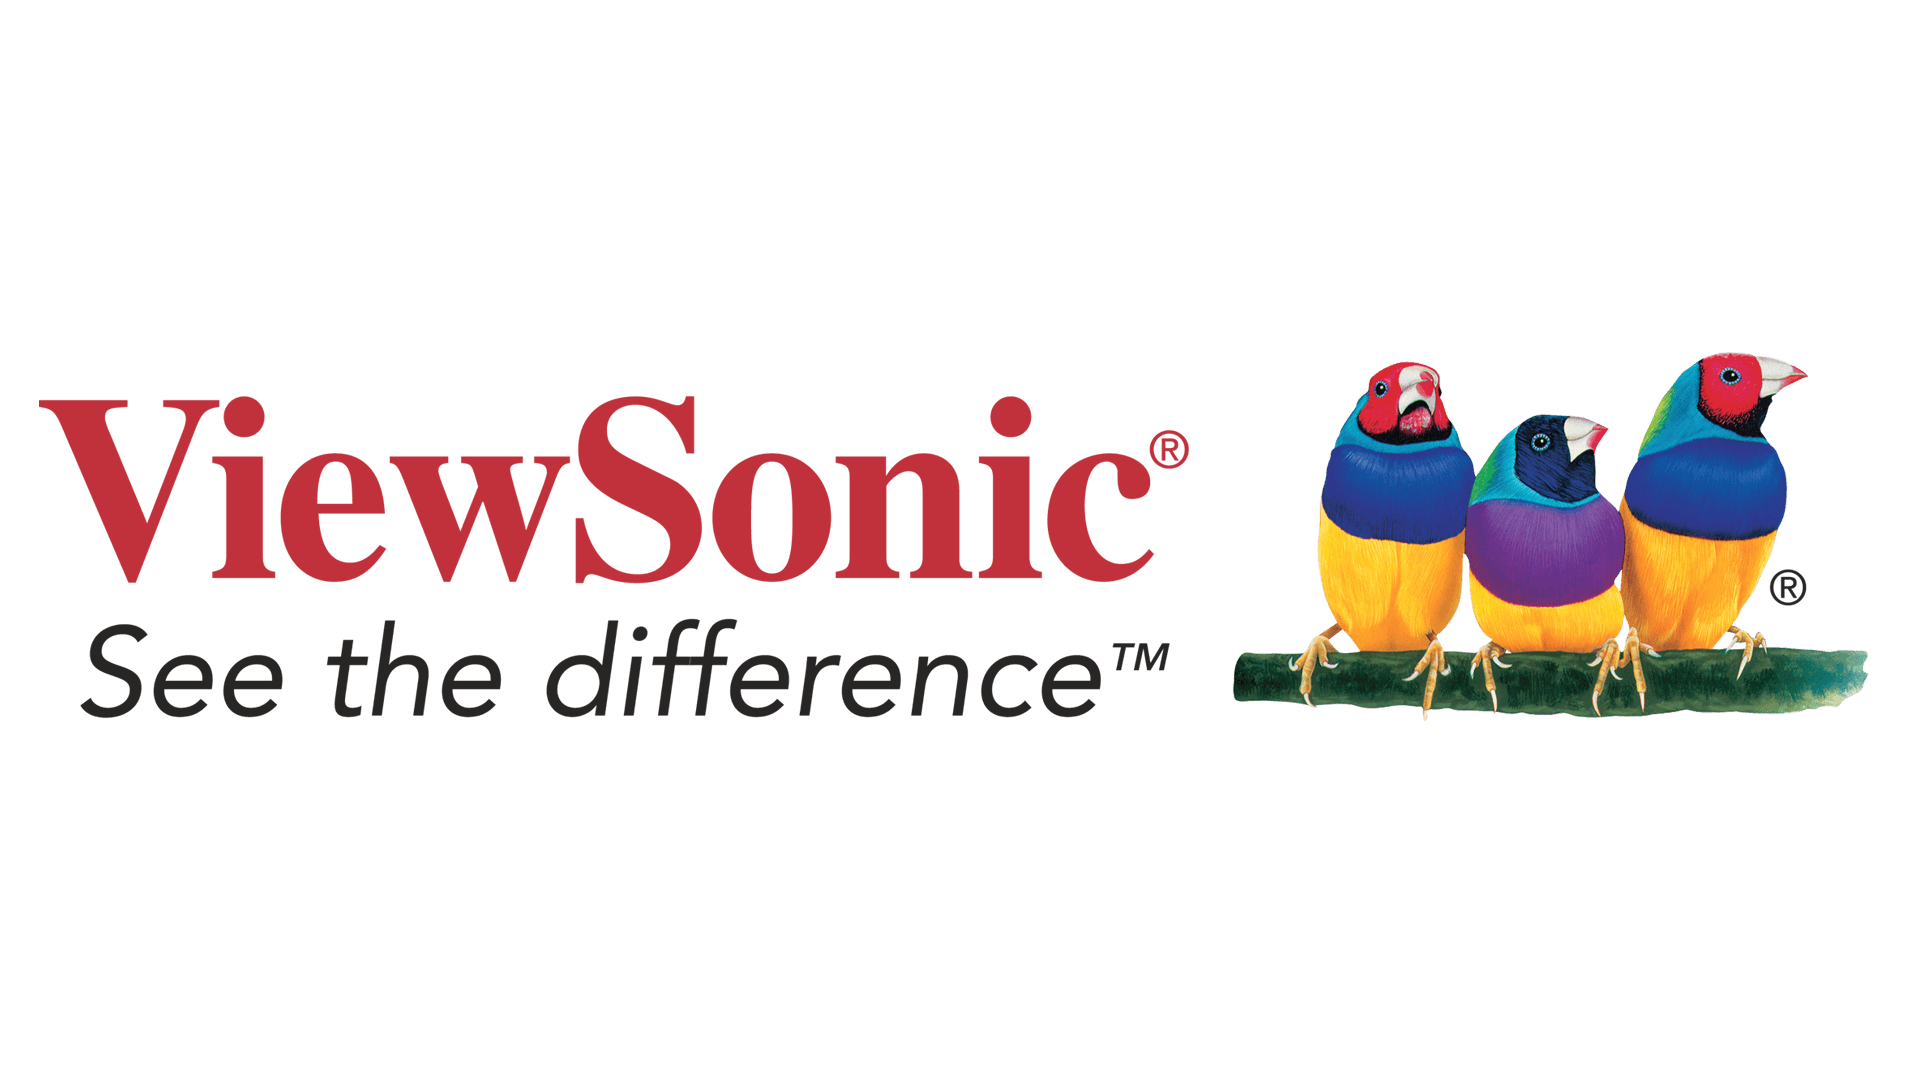 ViewSonic Logo - ViewSonic Logo, ViewSonic Symbol, Meaning, History and Evolution